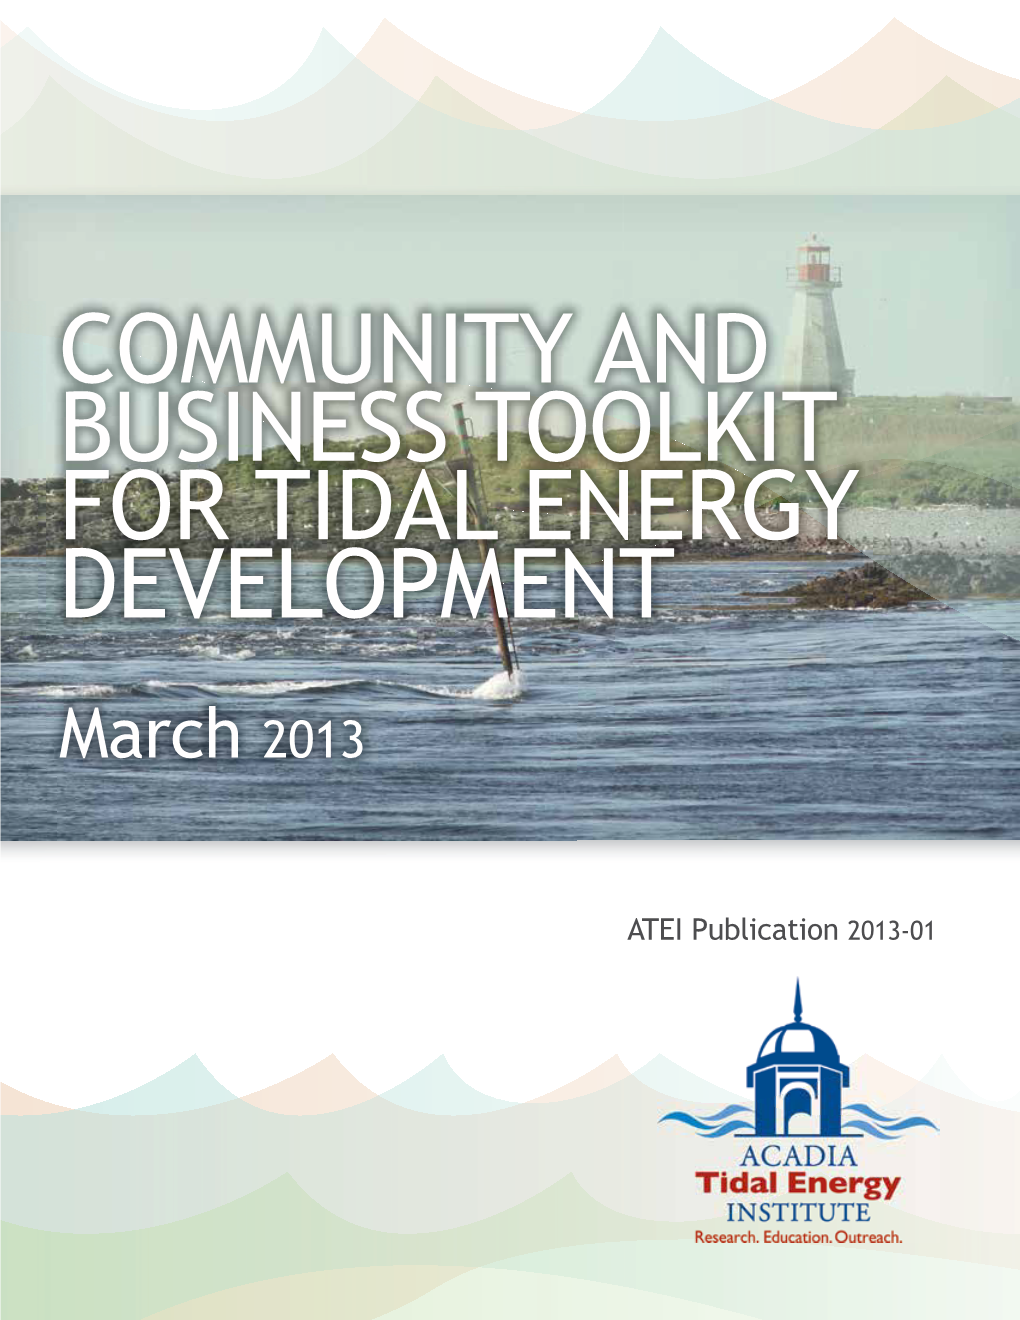 Community and Business Toolkit for Tidal Energy Development